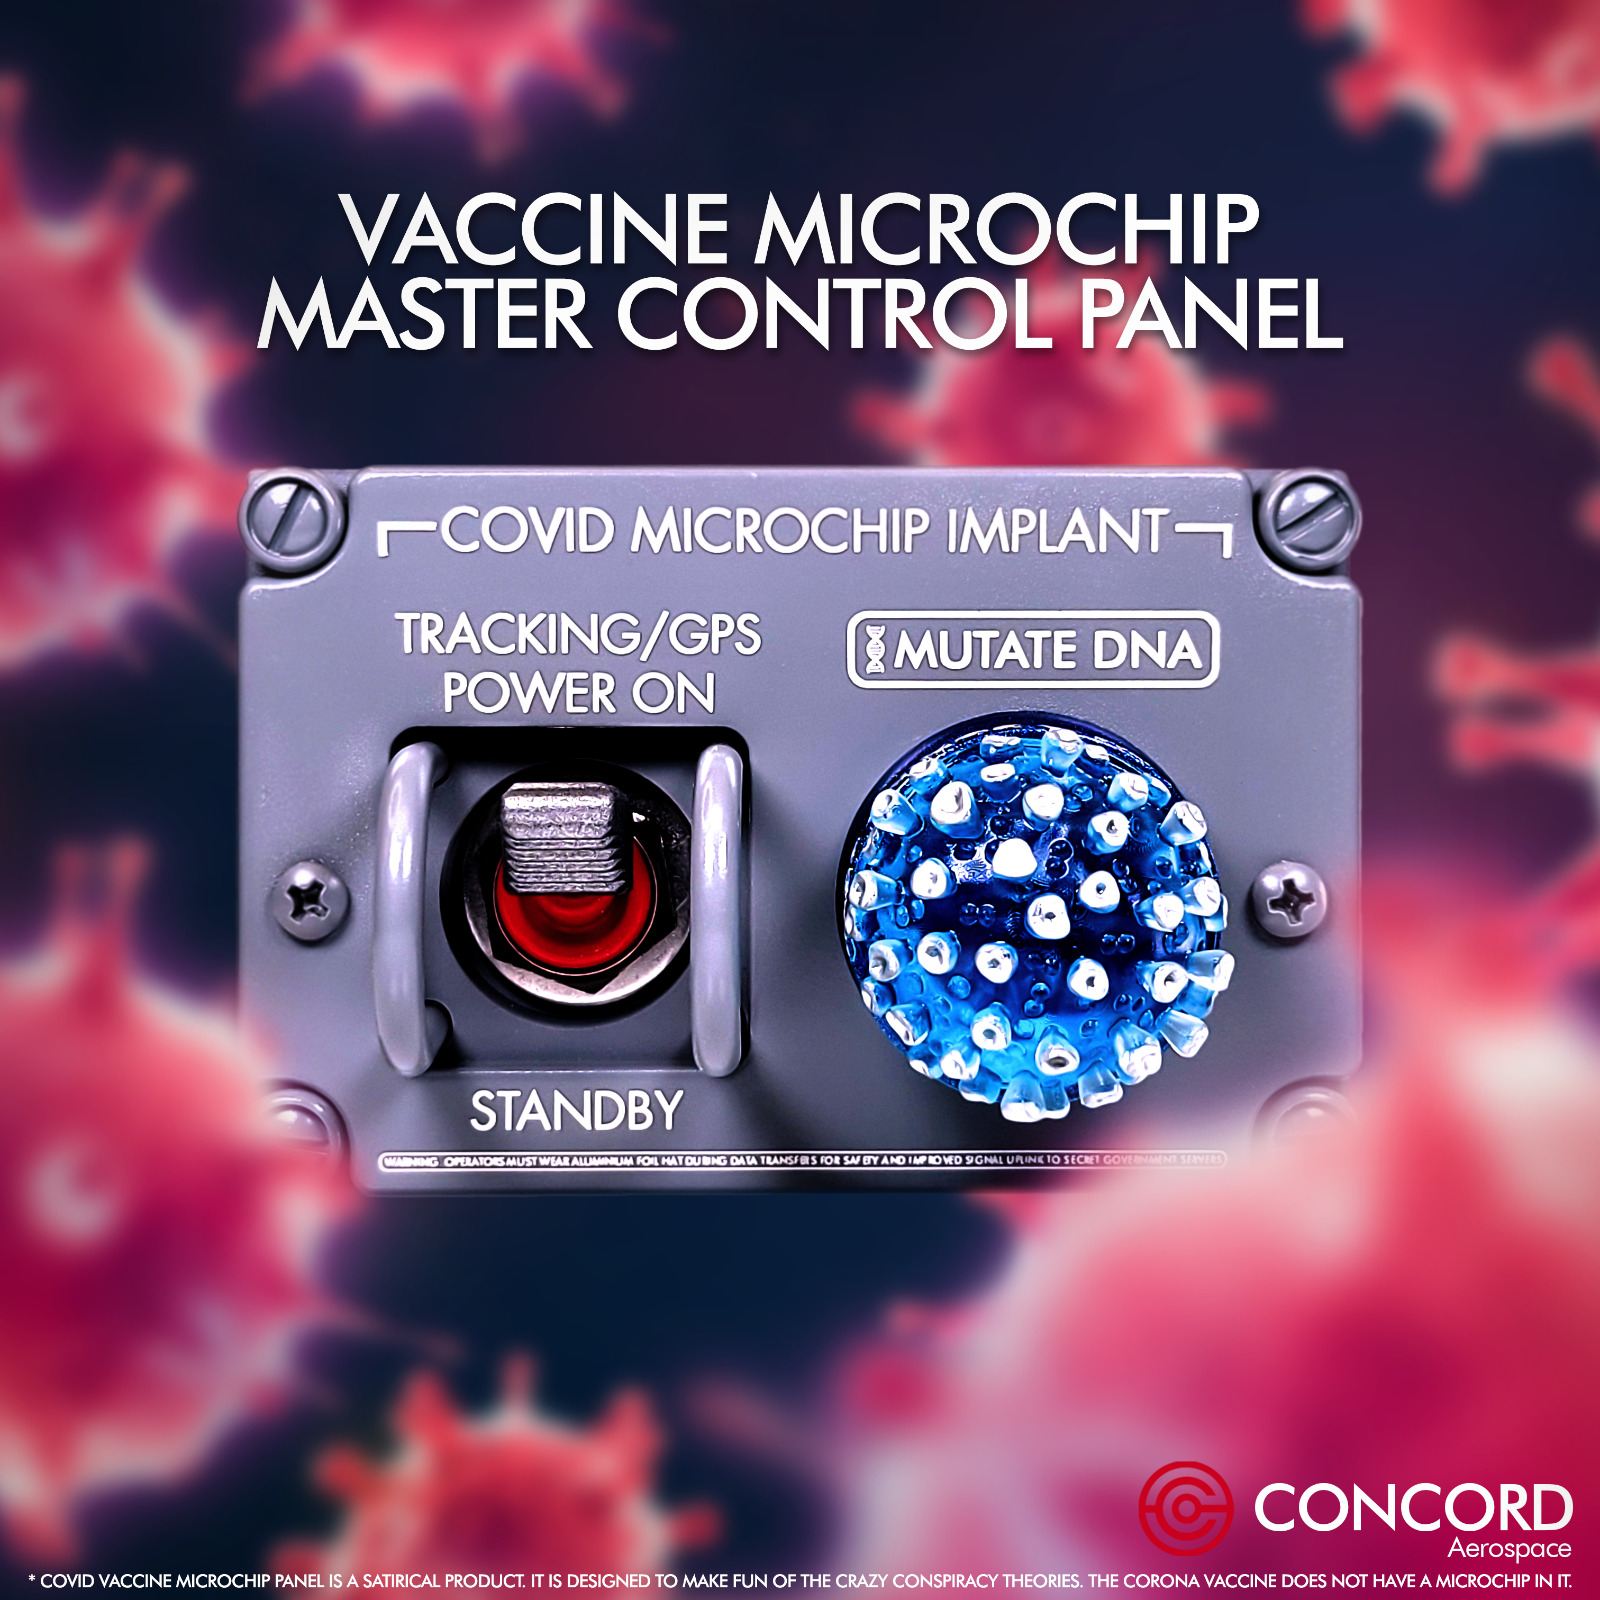 NEW MICROCHIP IMPLANT MASTER CONTROL PANEL 